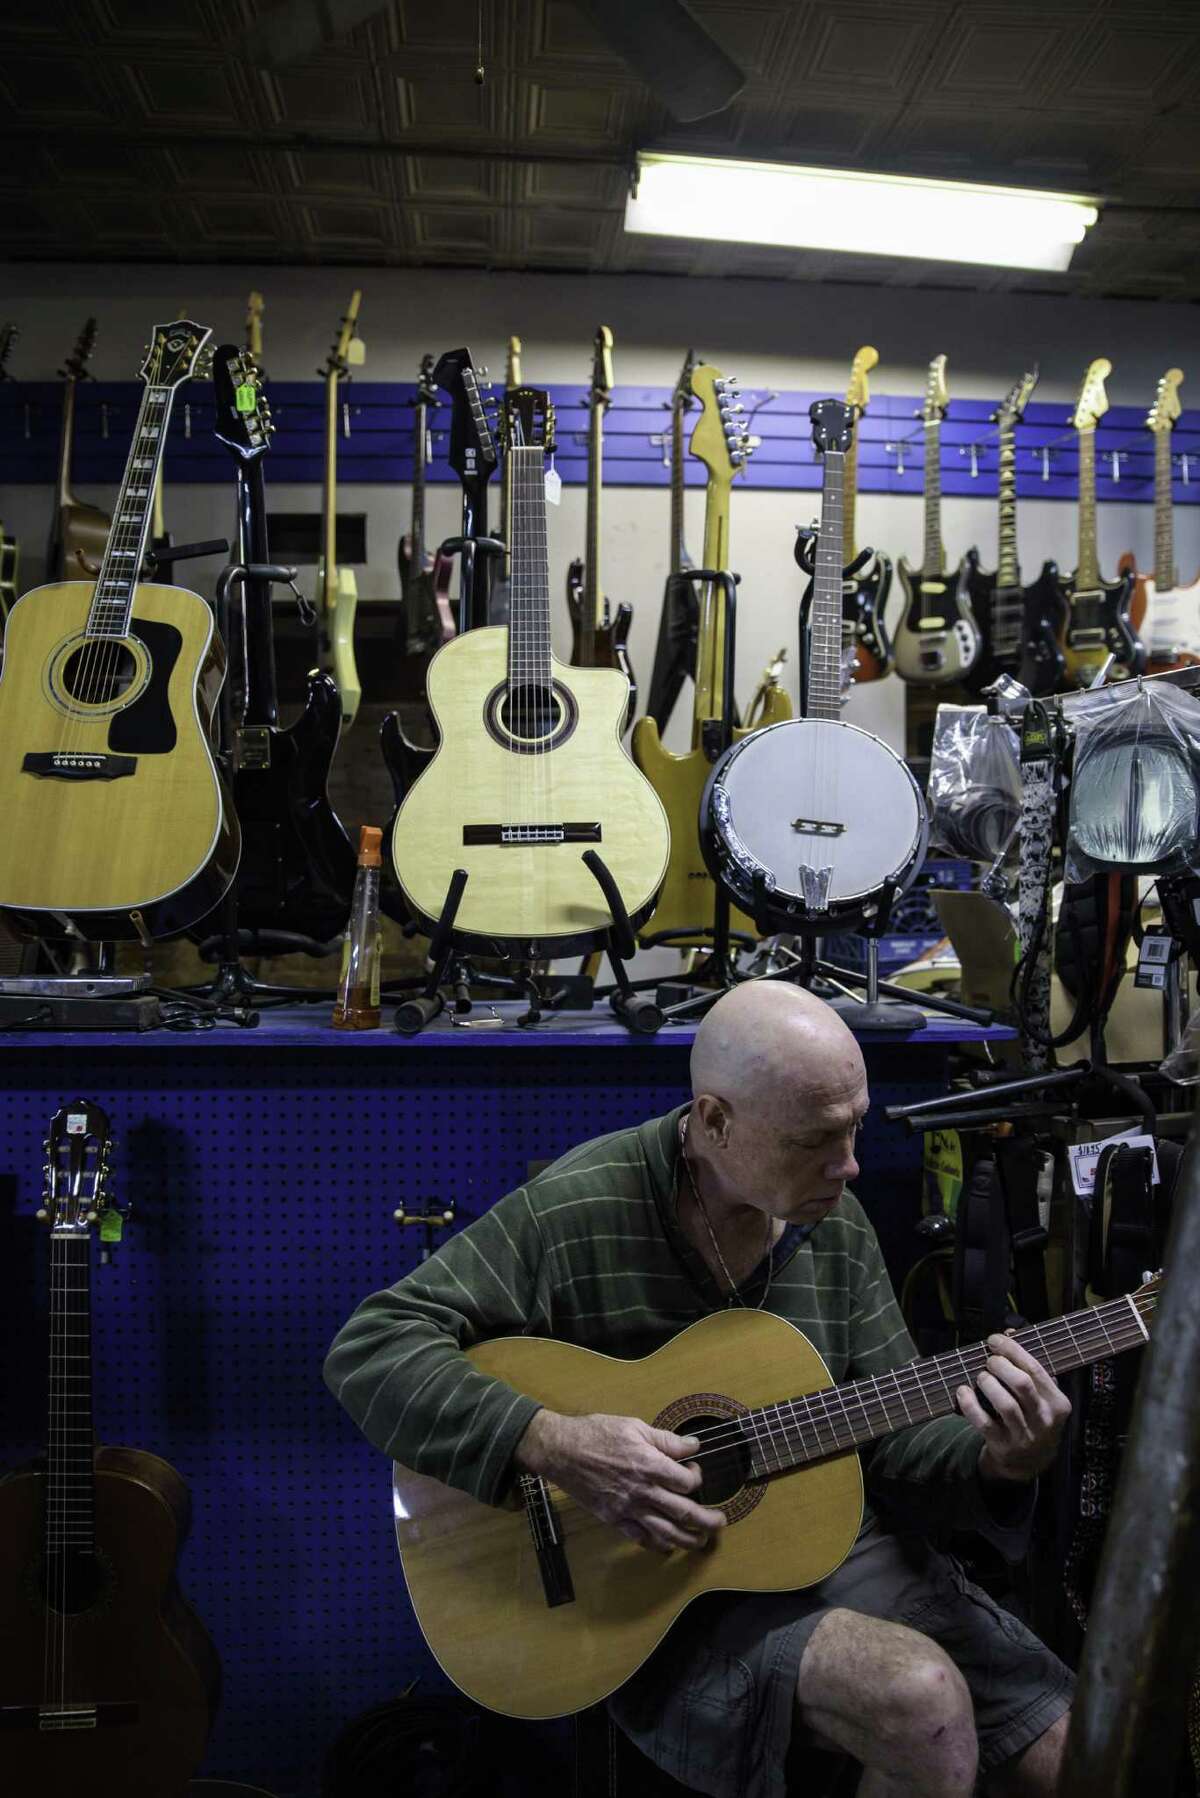 Alex Hussey, a regular customer, strums a guitar amid the vast selection at the Music Guild in Danbury.